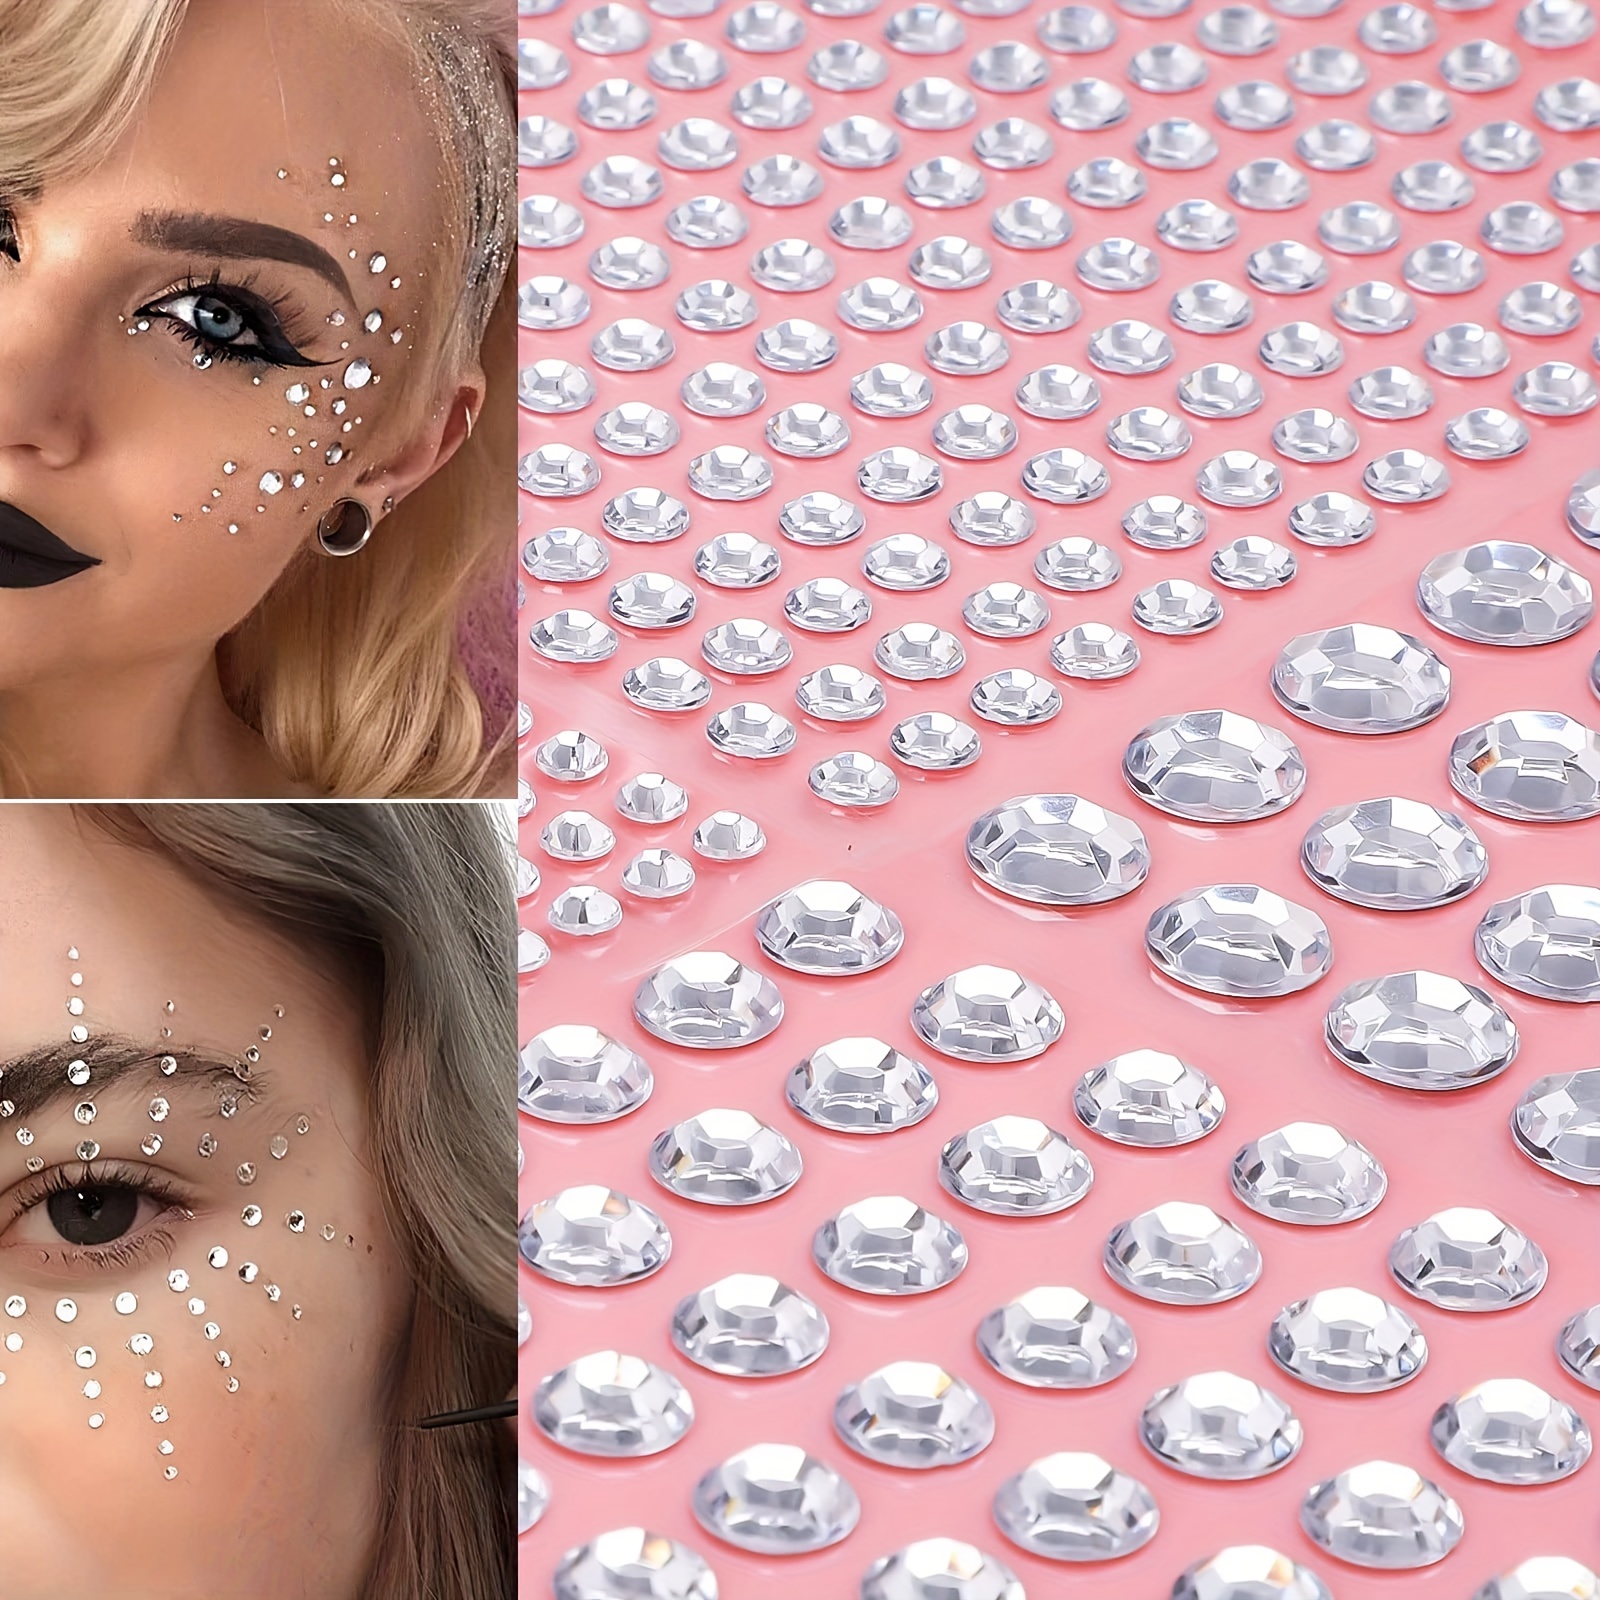  Rhinestone Stickers 3/4/5mm Multi Shapes Rainbow Face Sticky  Gems Crystal Self Adhesive Rhinestones, with Makeup Glue for Makeup Eyes  Face Hair Body Nails, Crafts and Decorations : Arts, Crafts & Sewing